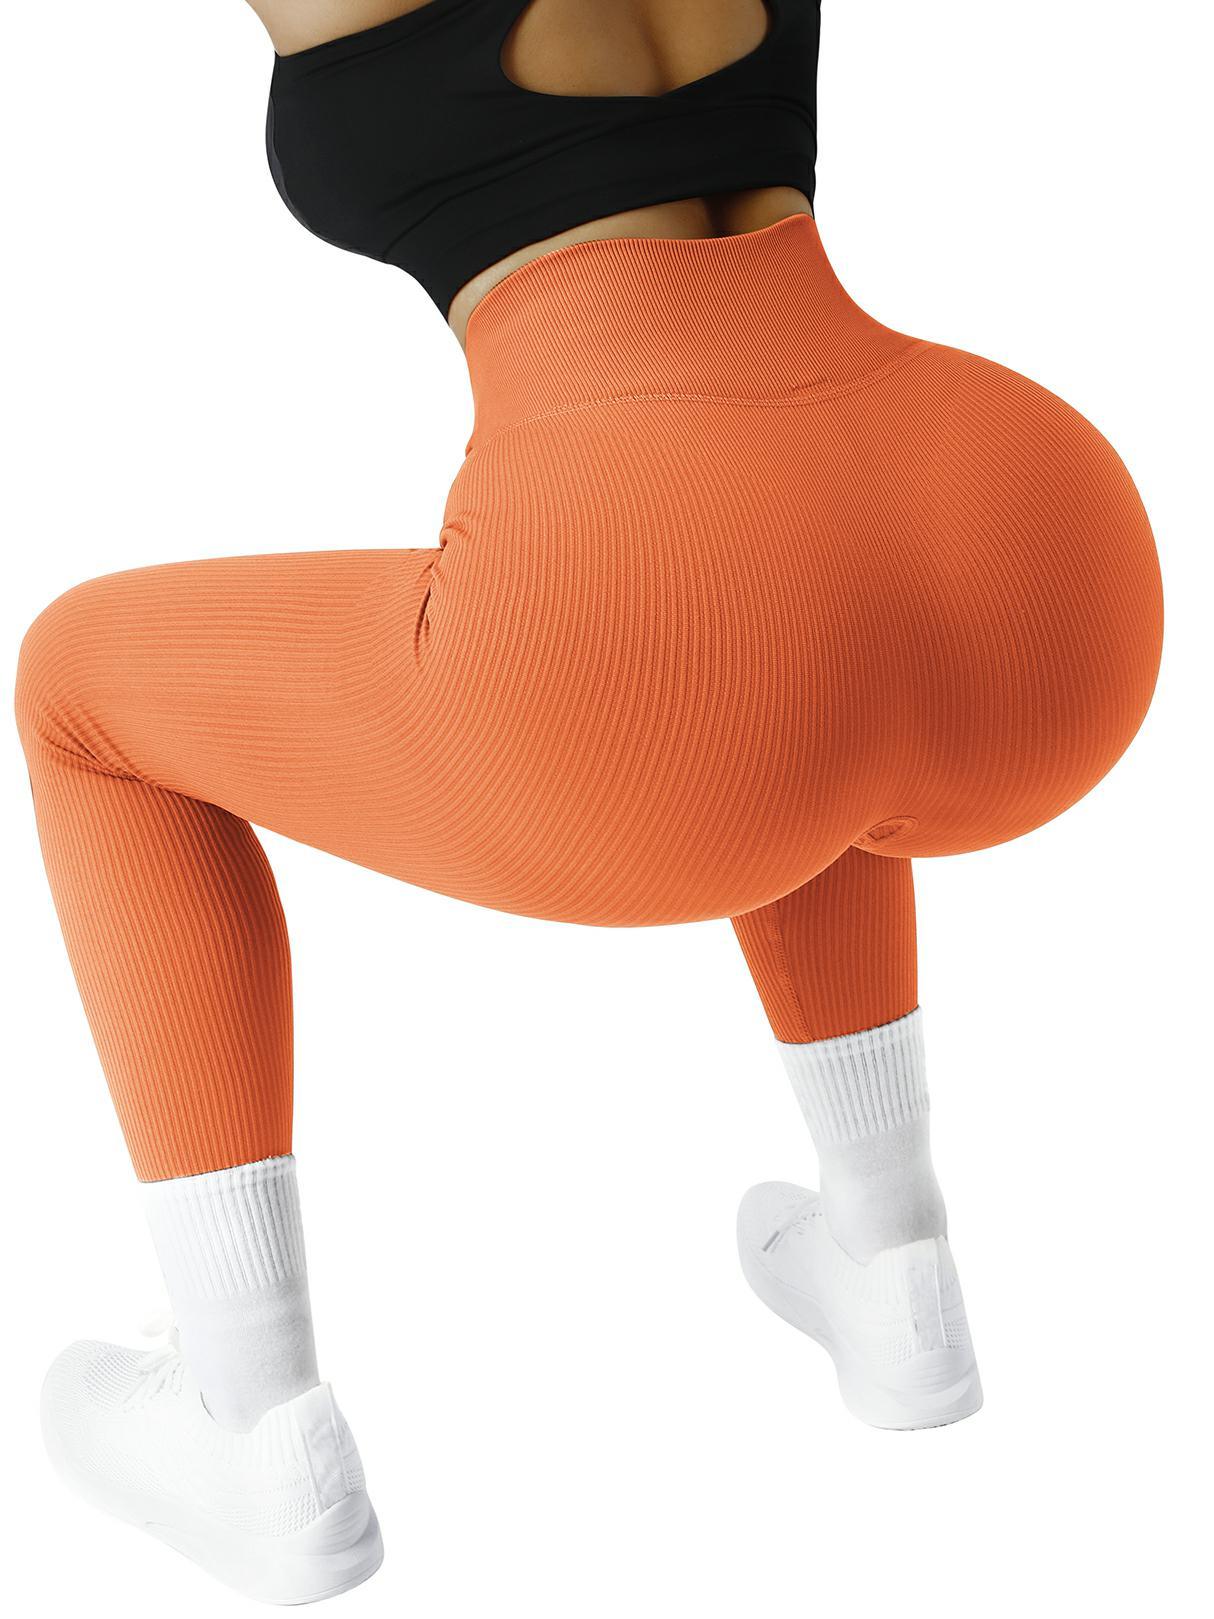  Challengym Ribbed Seamless Leggings for Women Butt